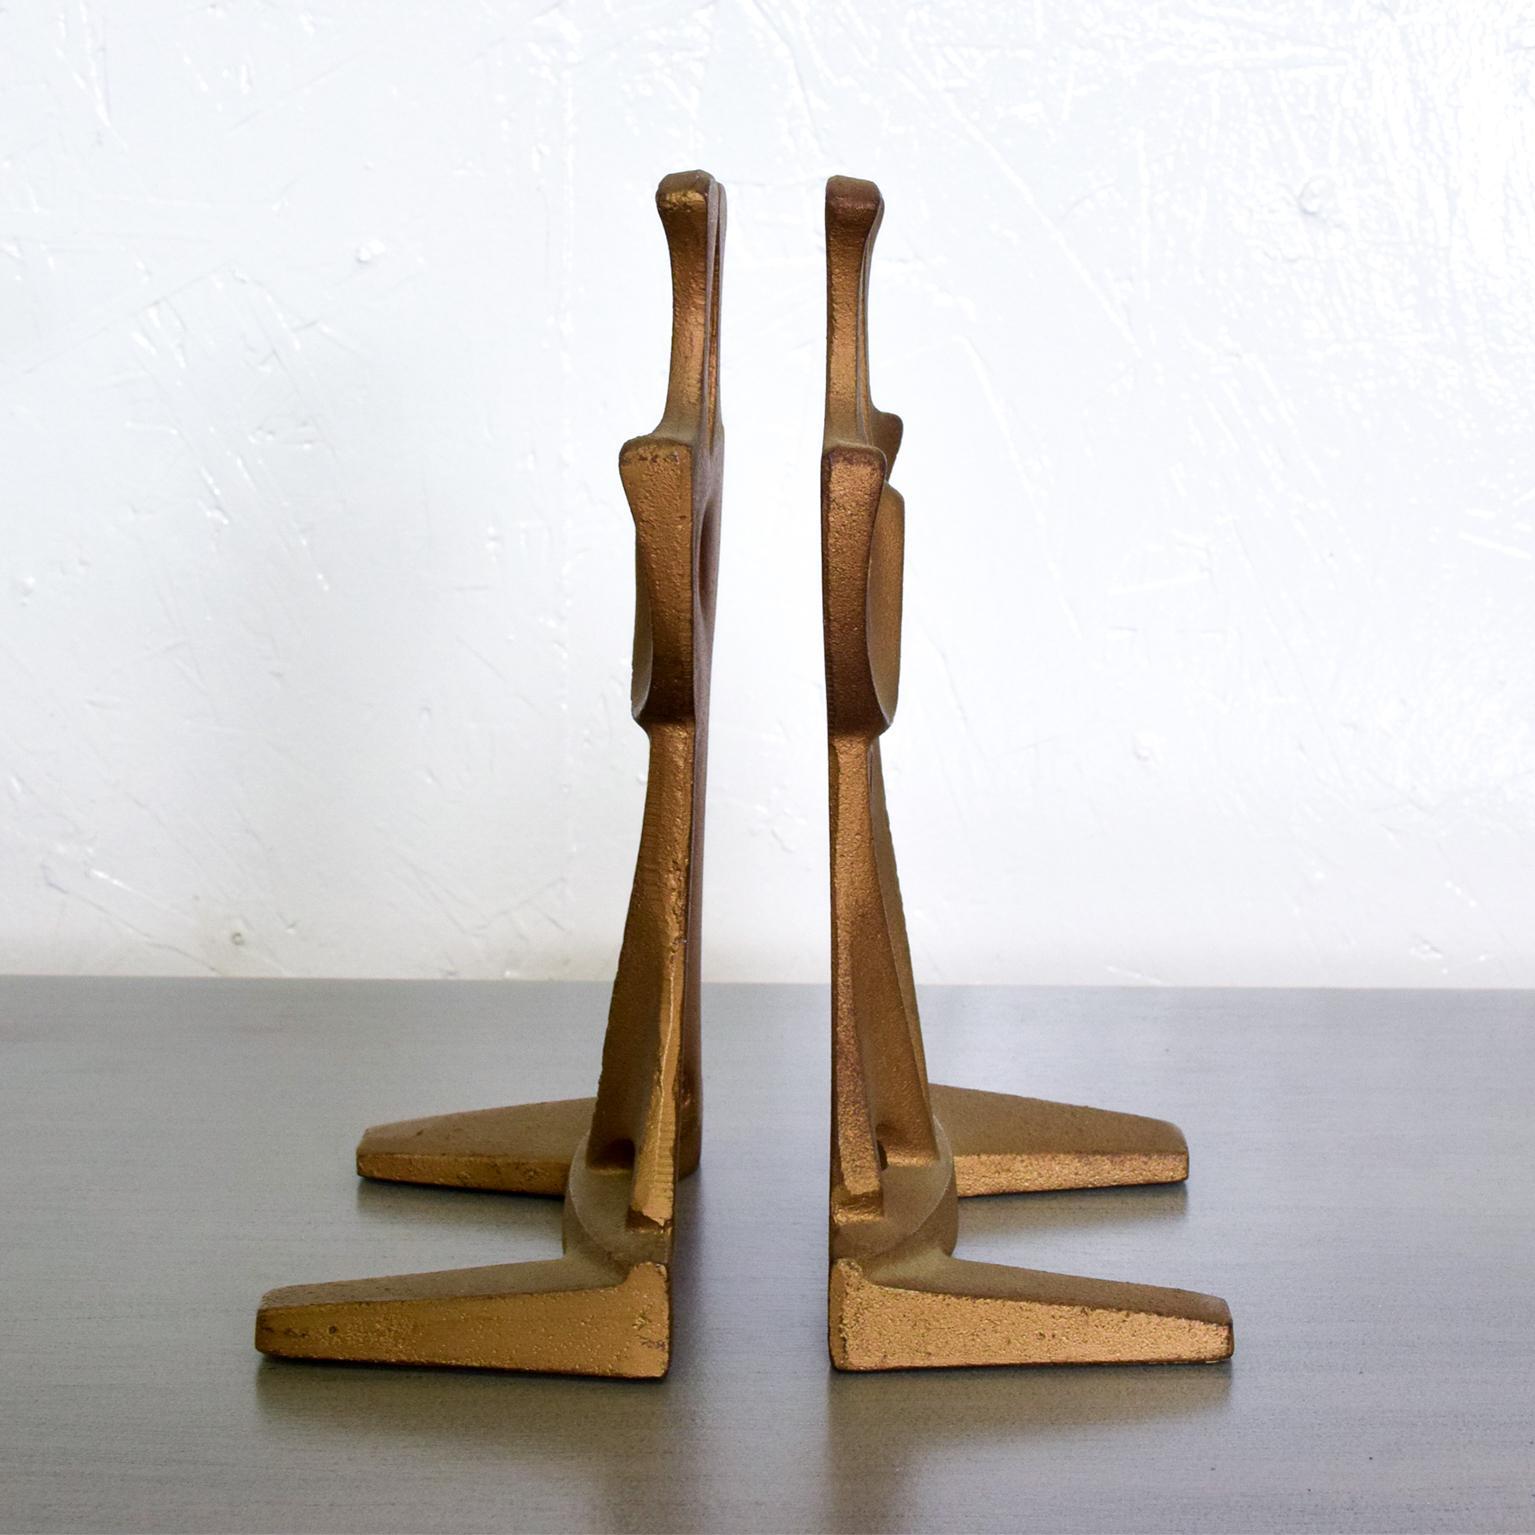 For your consideration, a Mid-Century Modern cast iron sculptural bookends. Stamped: 